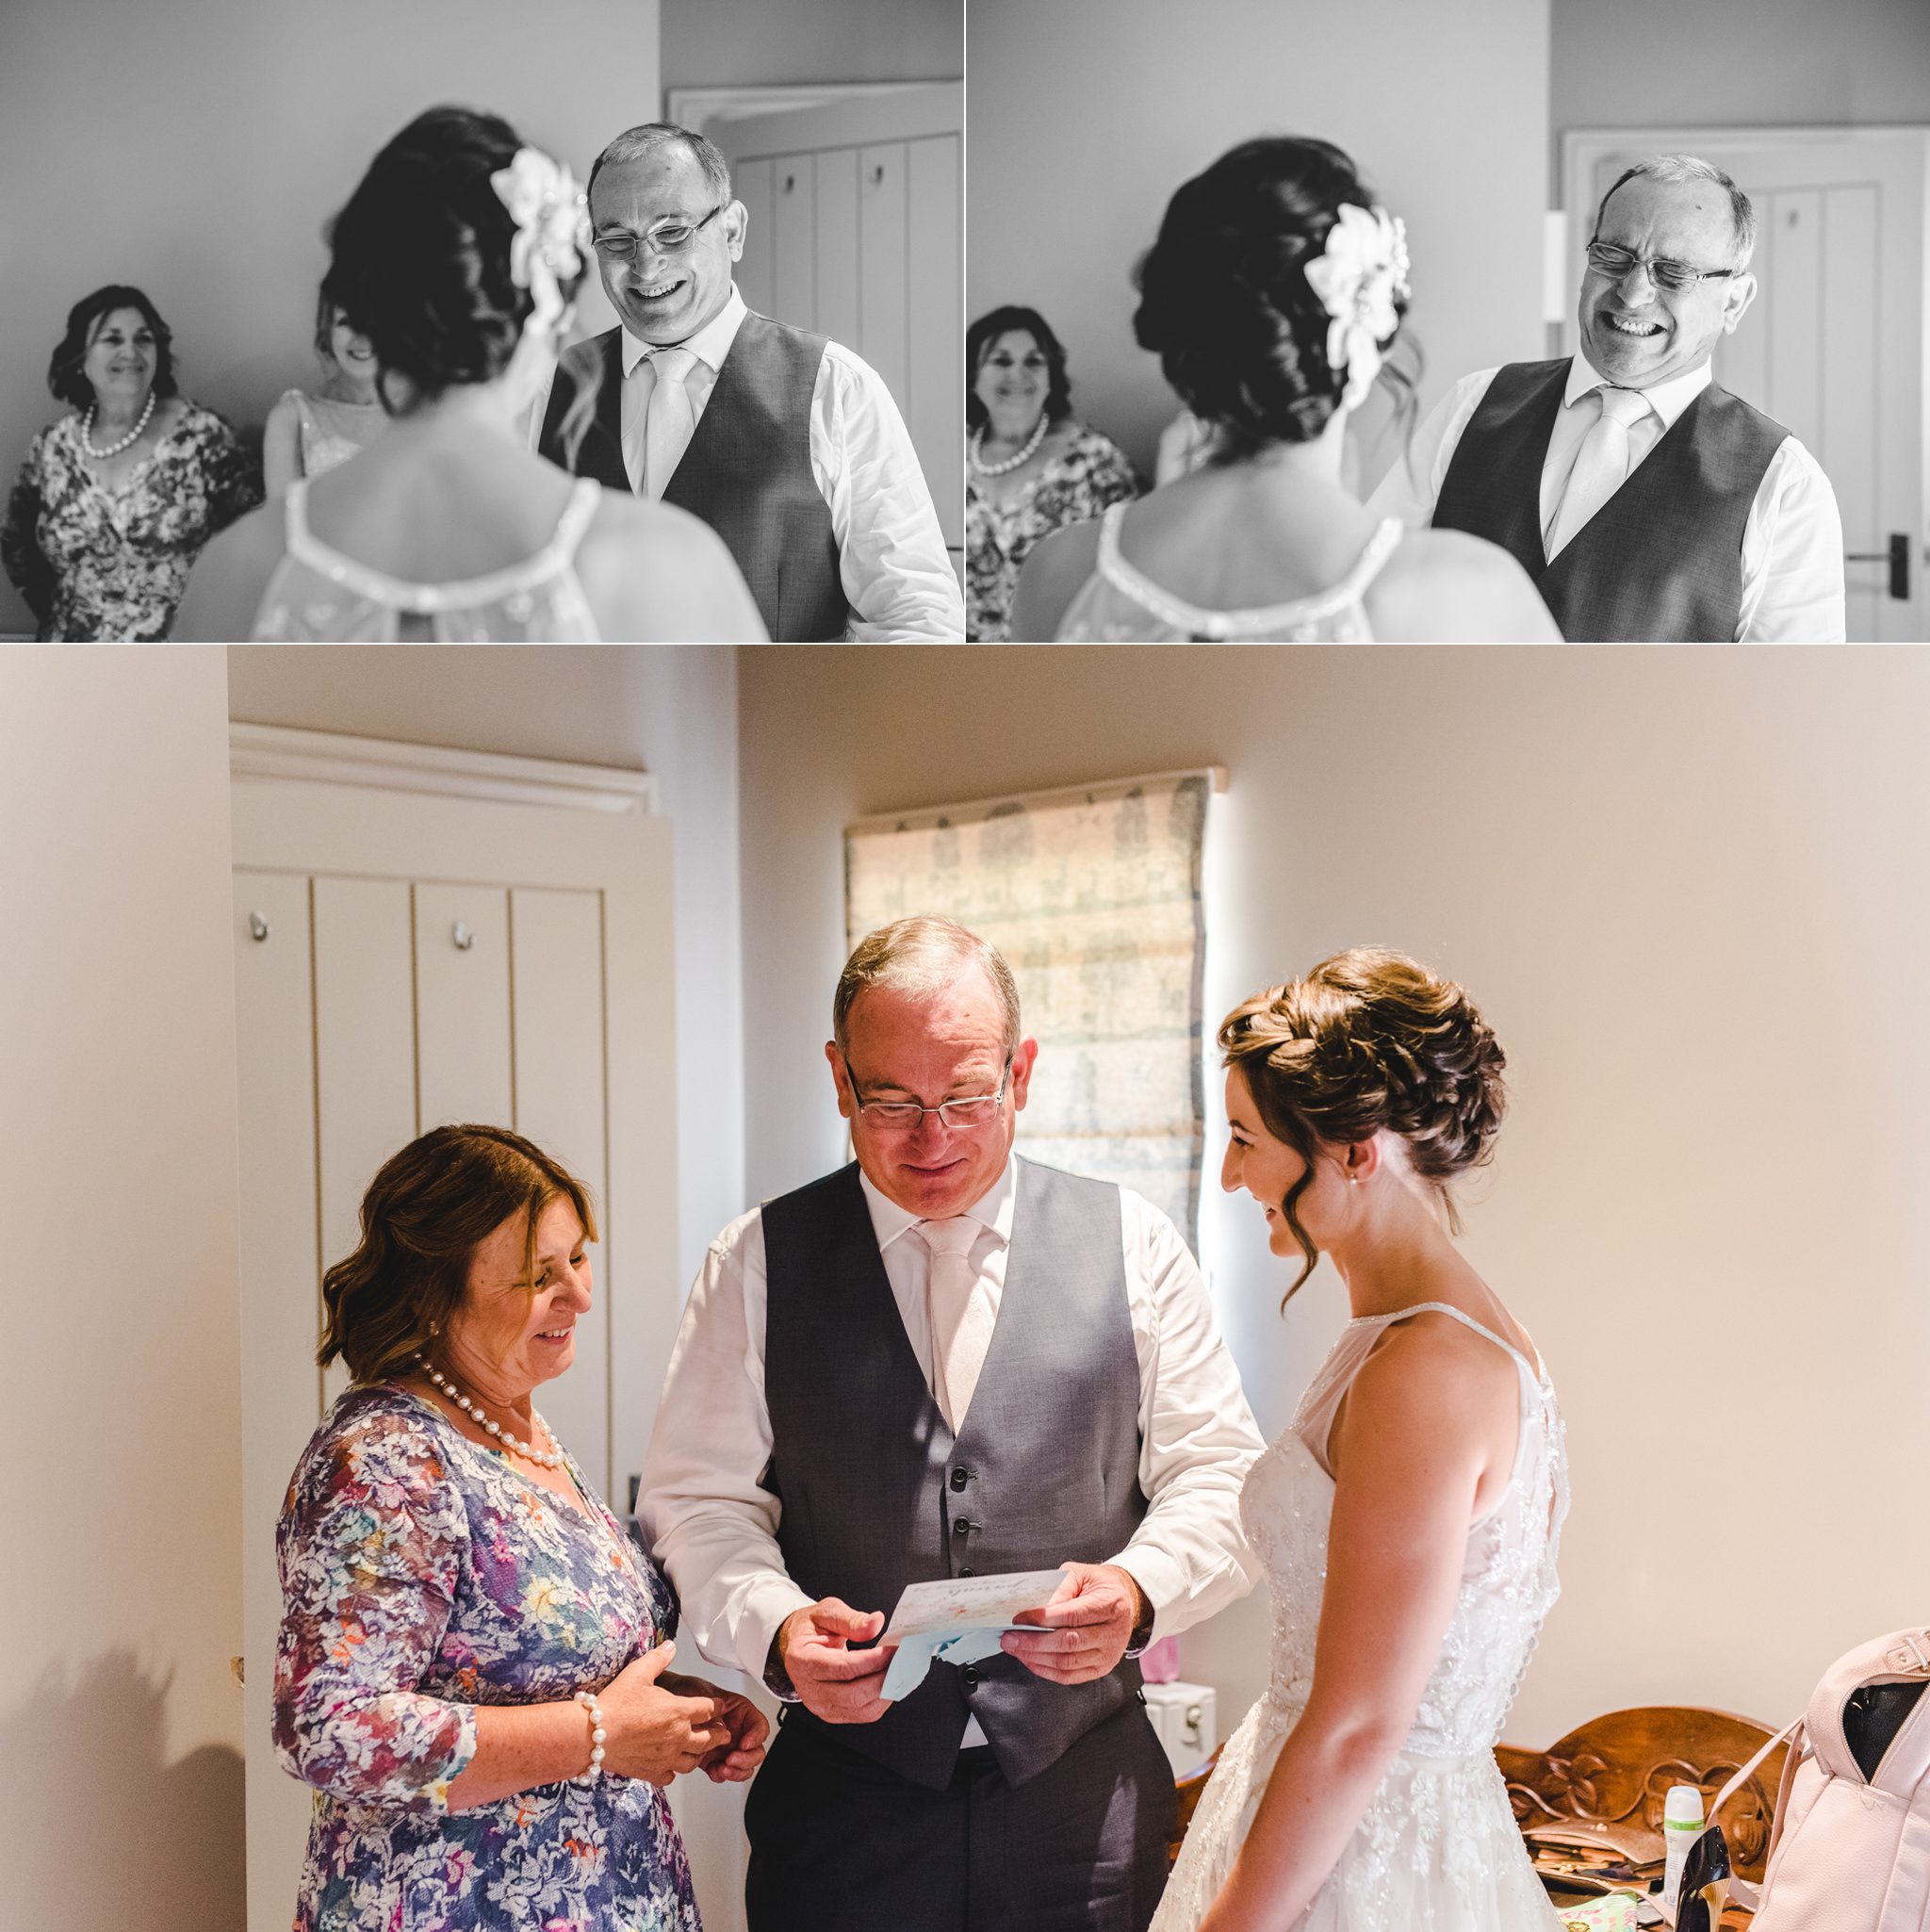 Bride's father seeing her in her wedding dress for the first time